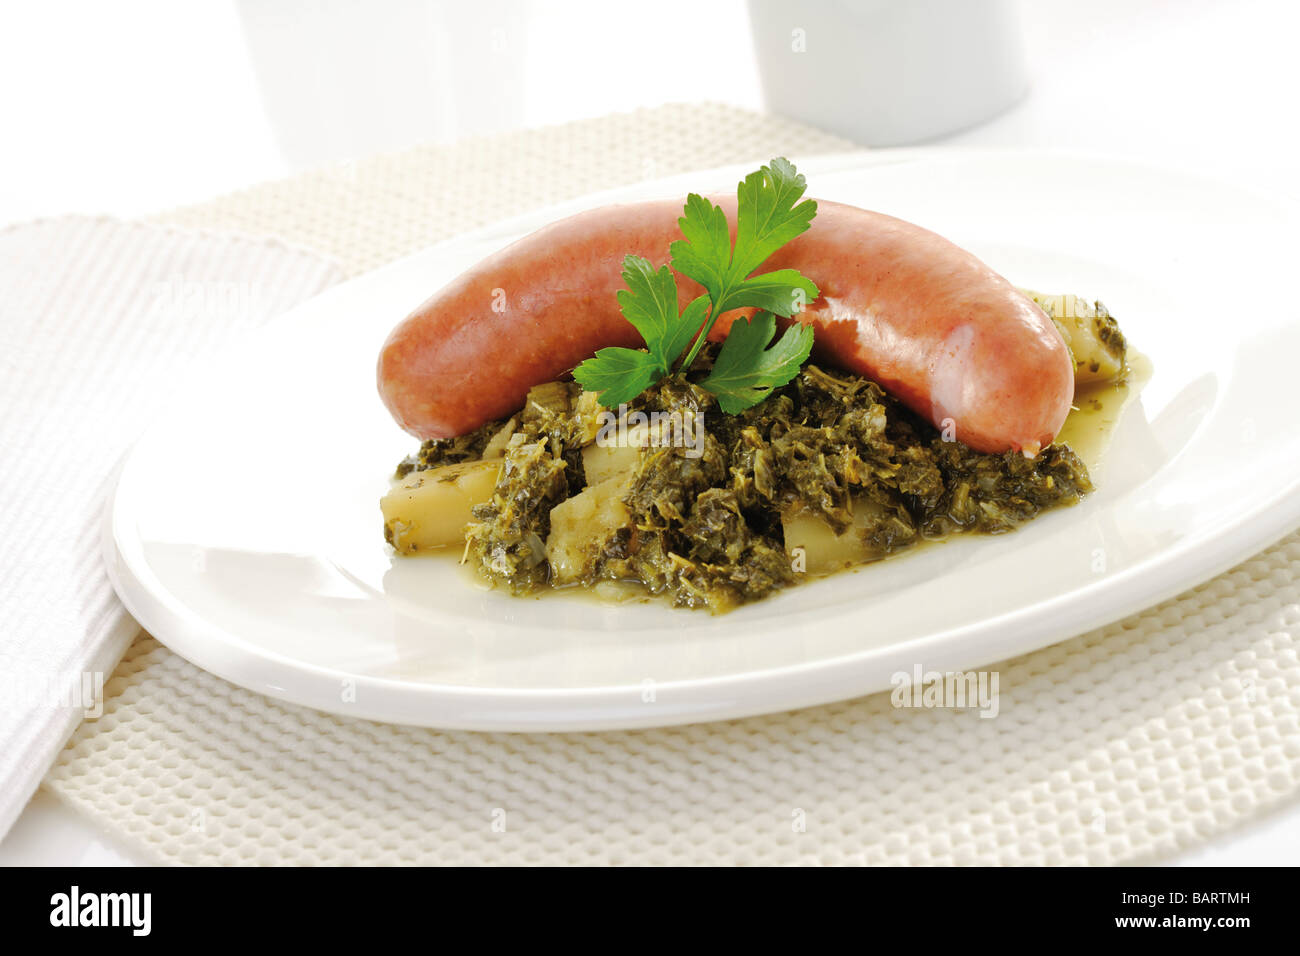 Curly kale with sausage and potatoes on plate Stock Photo